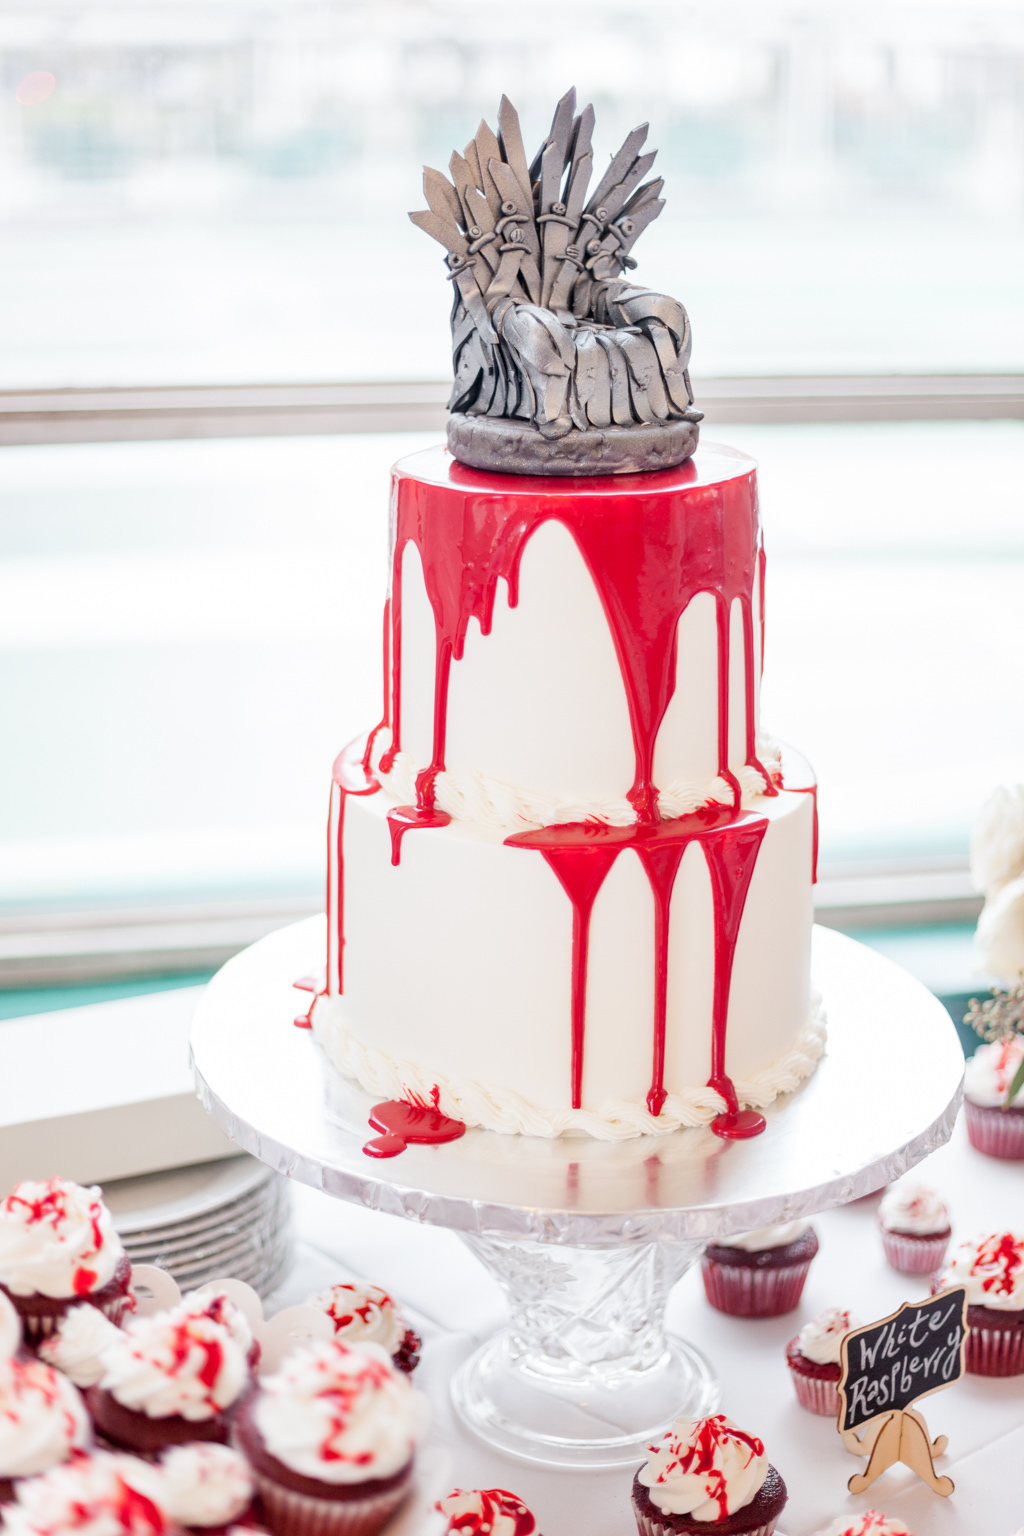 Two Tiered Round White Wedding Cake with Dripping Red Icing, and Custom Game of Thrones Silver Cake Topper with Red Velvet Cupcakes